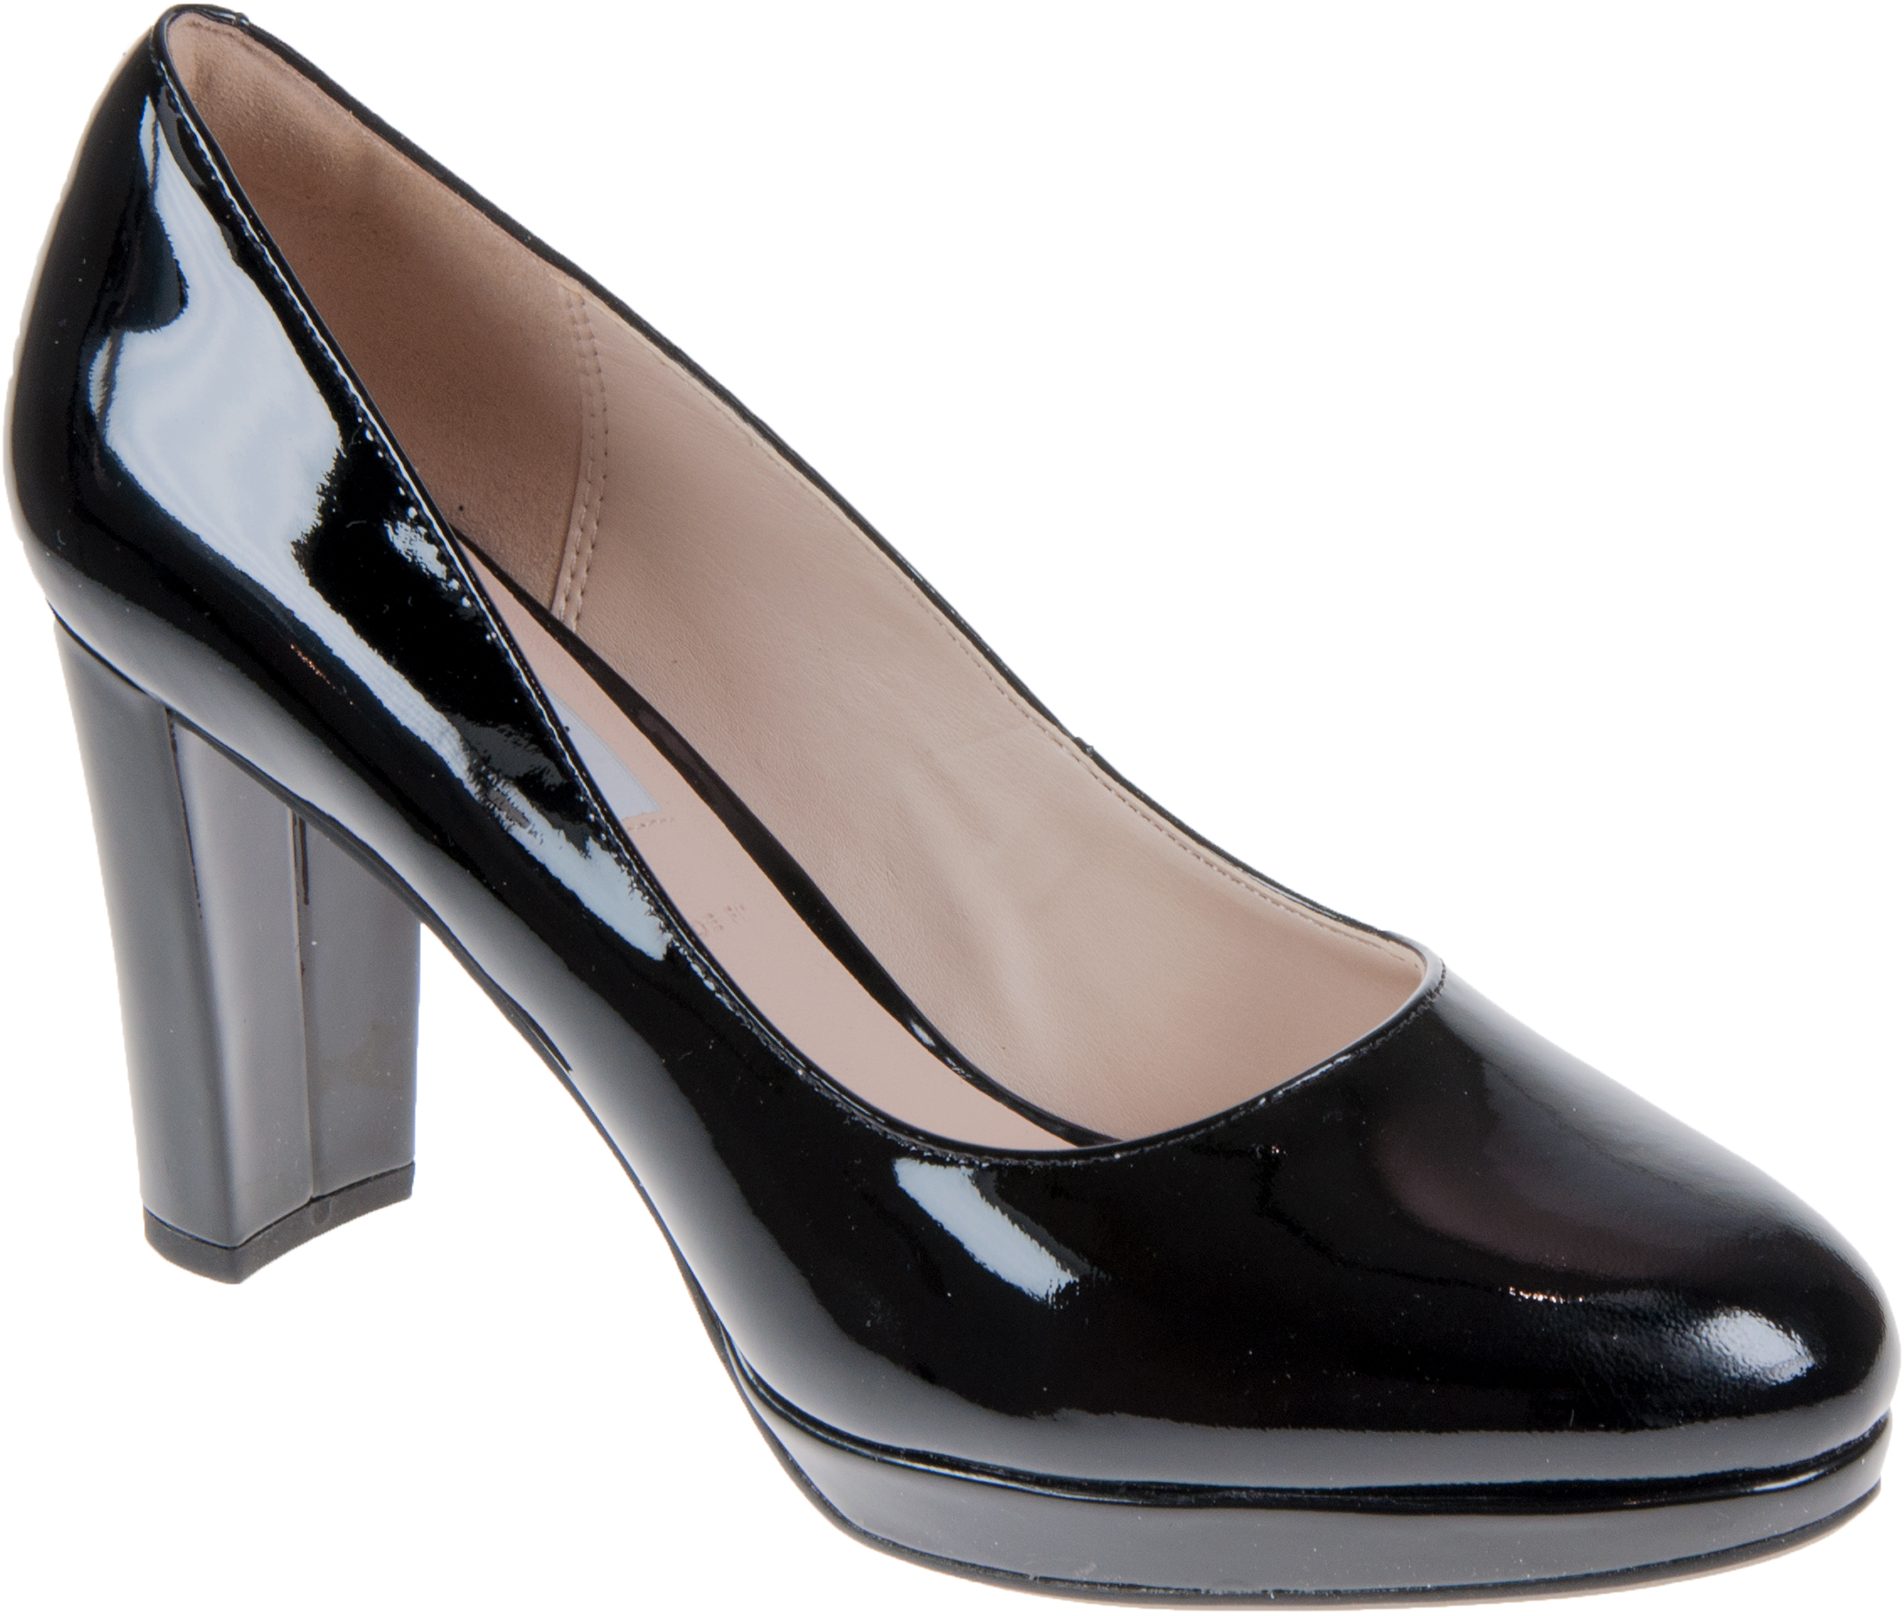 Clarks Kendra Sienna Black Patent 26118843 - Court Shoes - Humphries Shoes